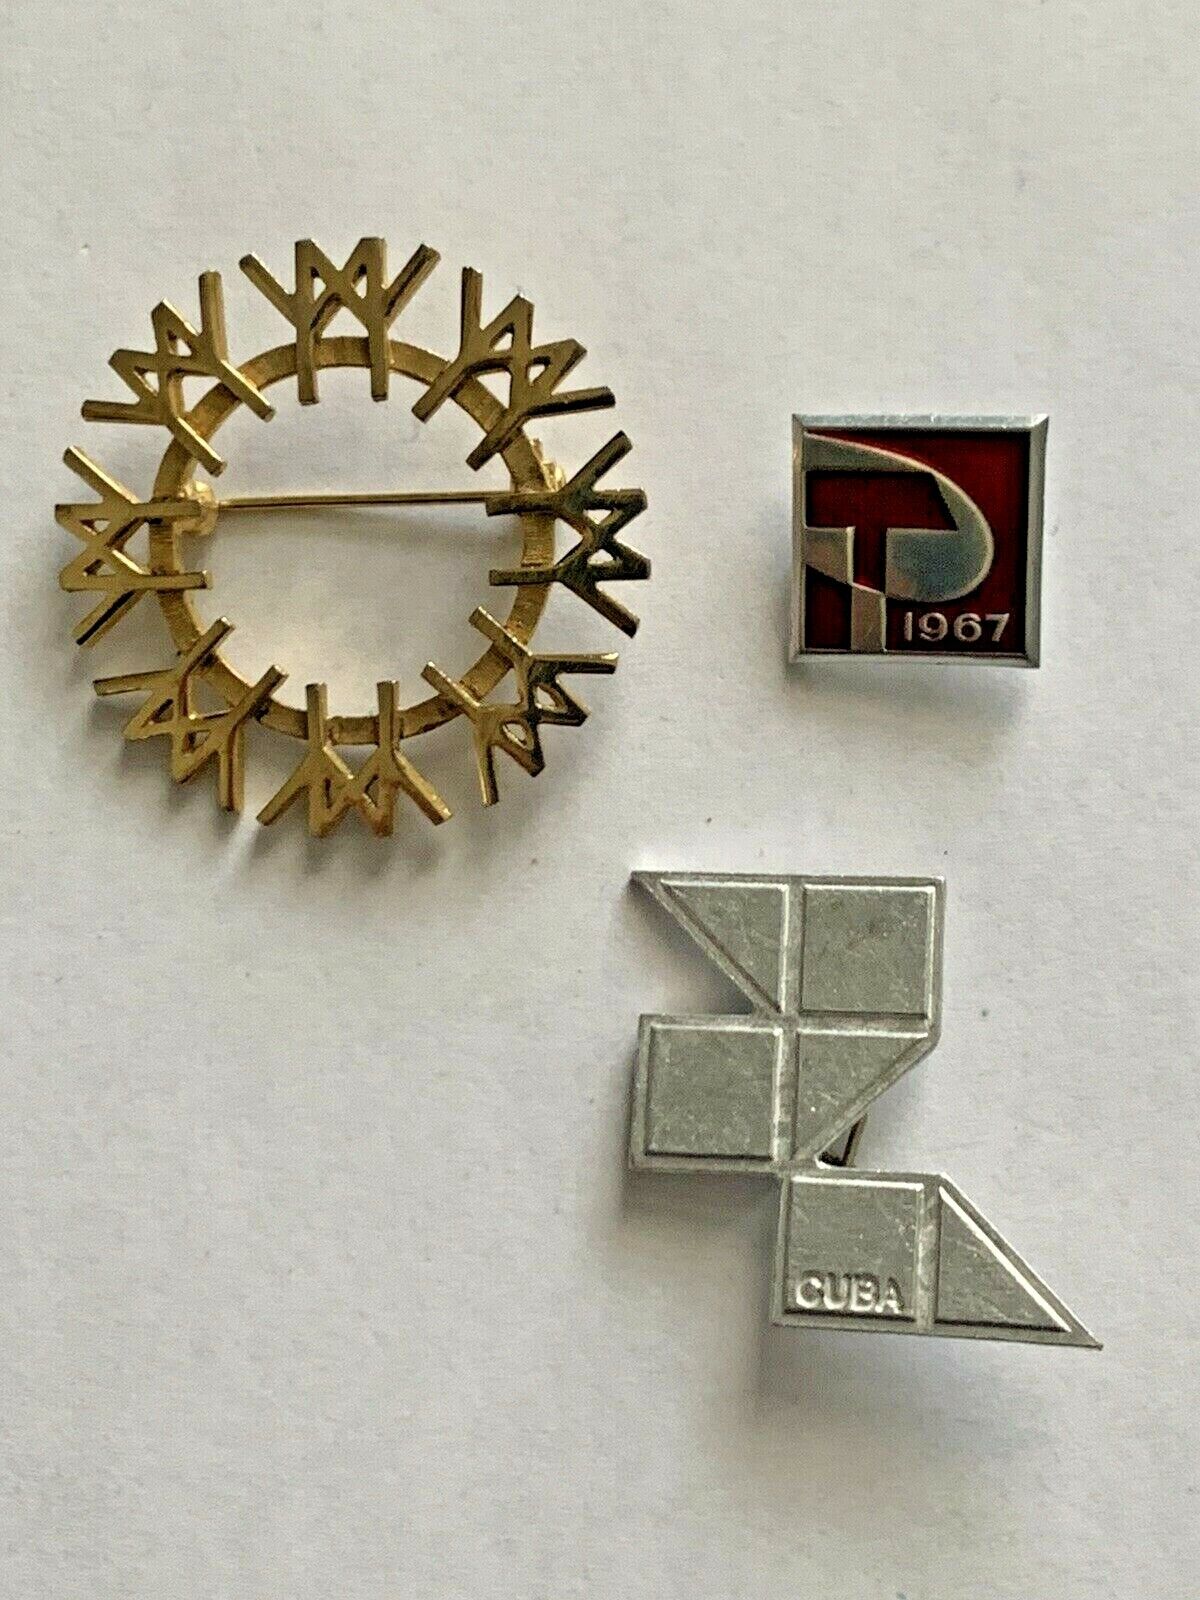 Montreal Expo 67 Man And His World Brooch World's Fair & Cuba Ussr Pavilion Pins